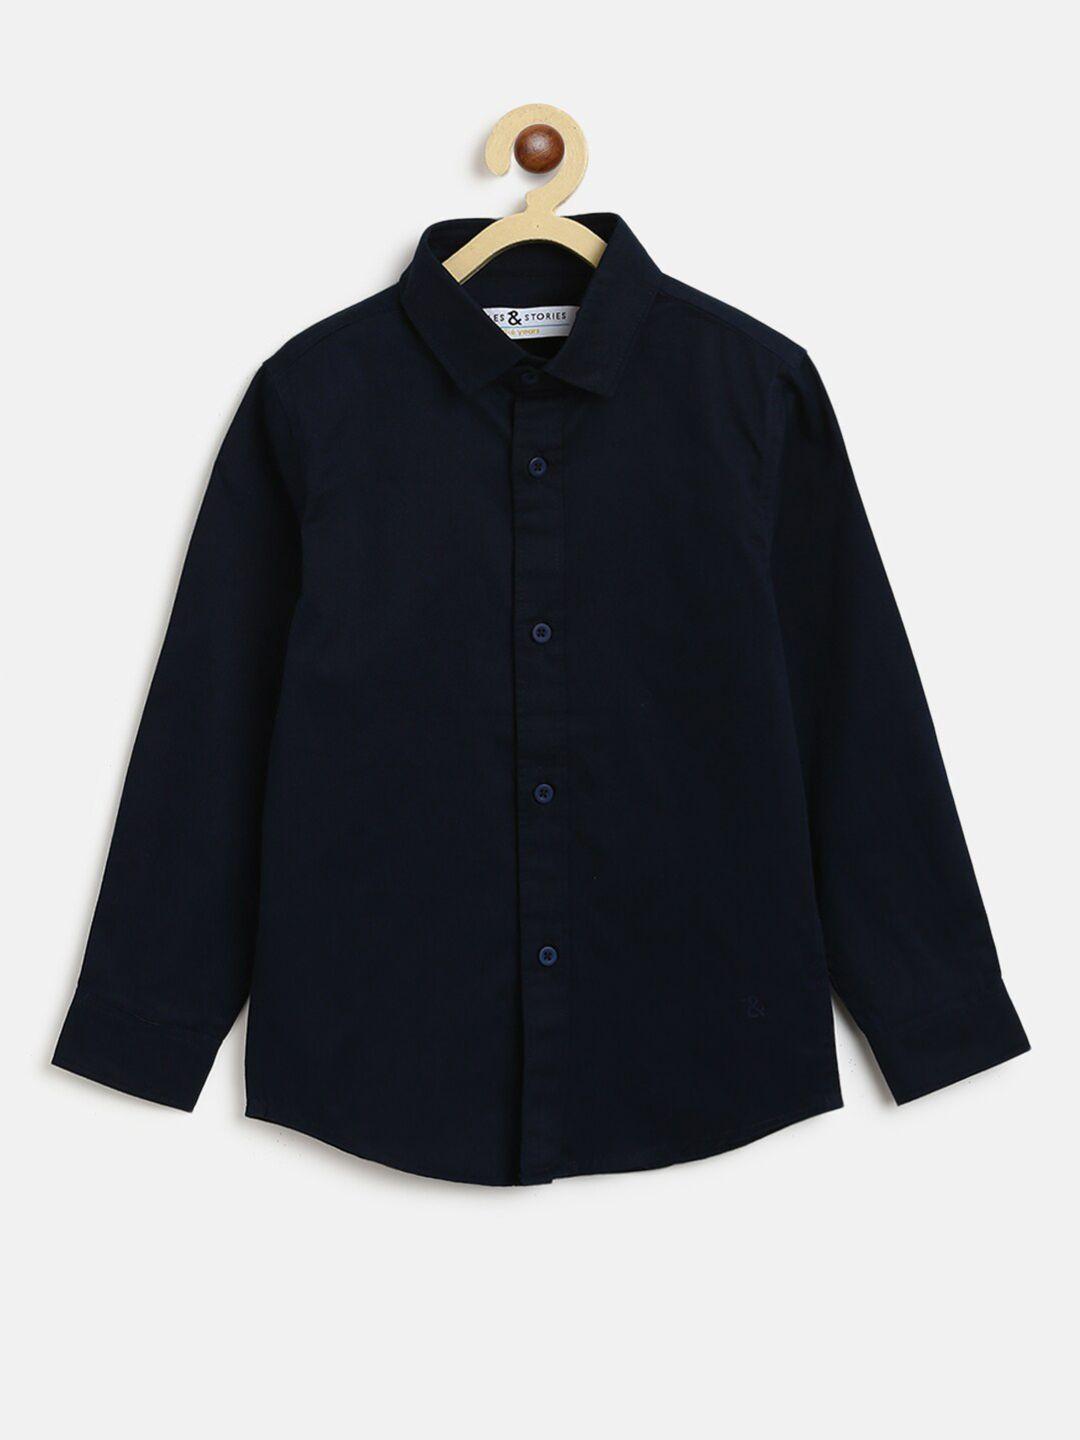 tales-&-stories-boys-navy-blue-casual-shirt